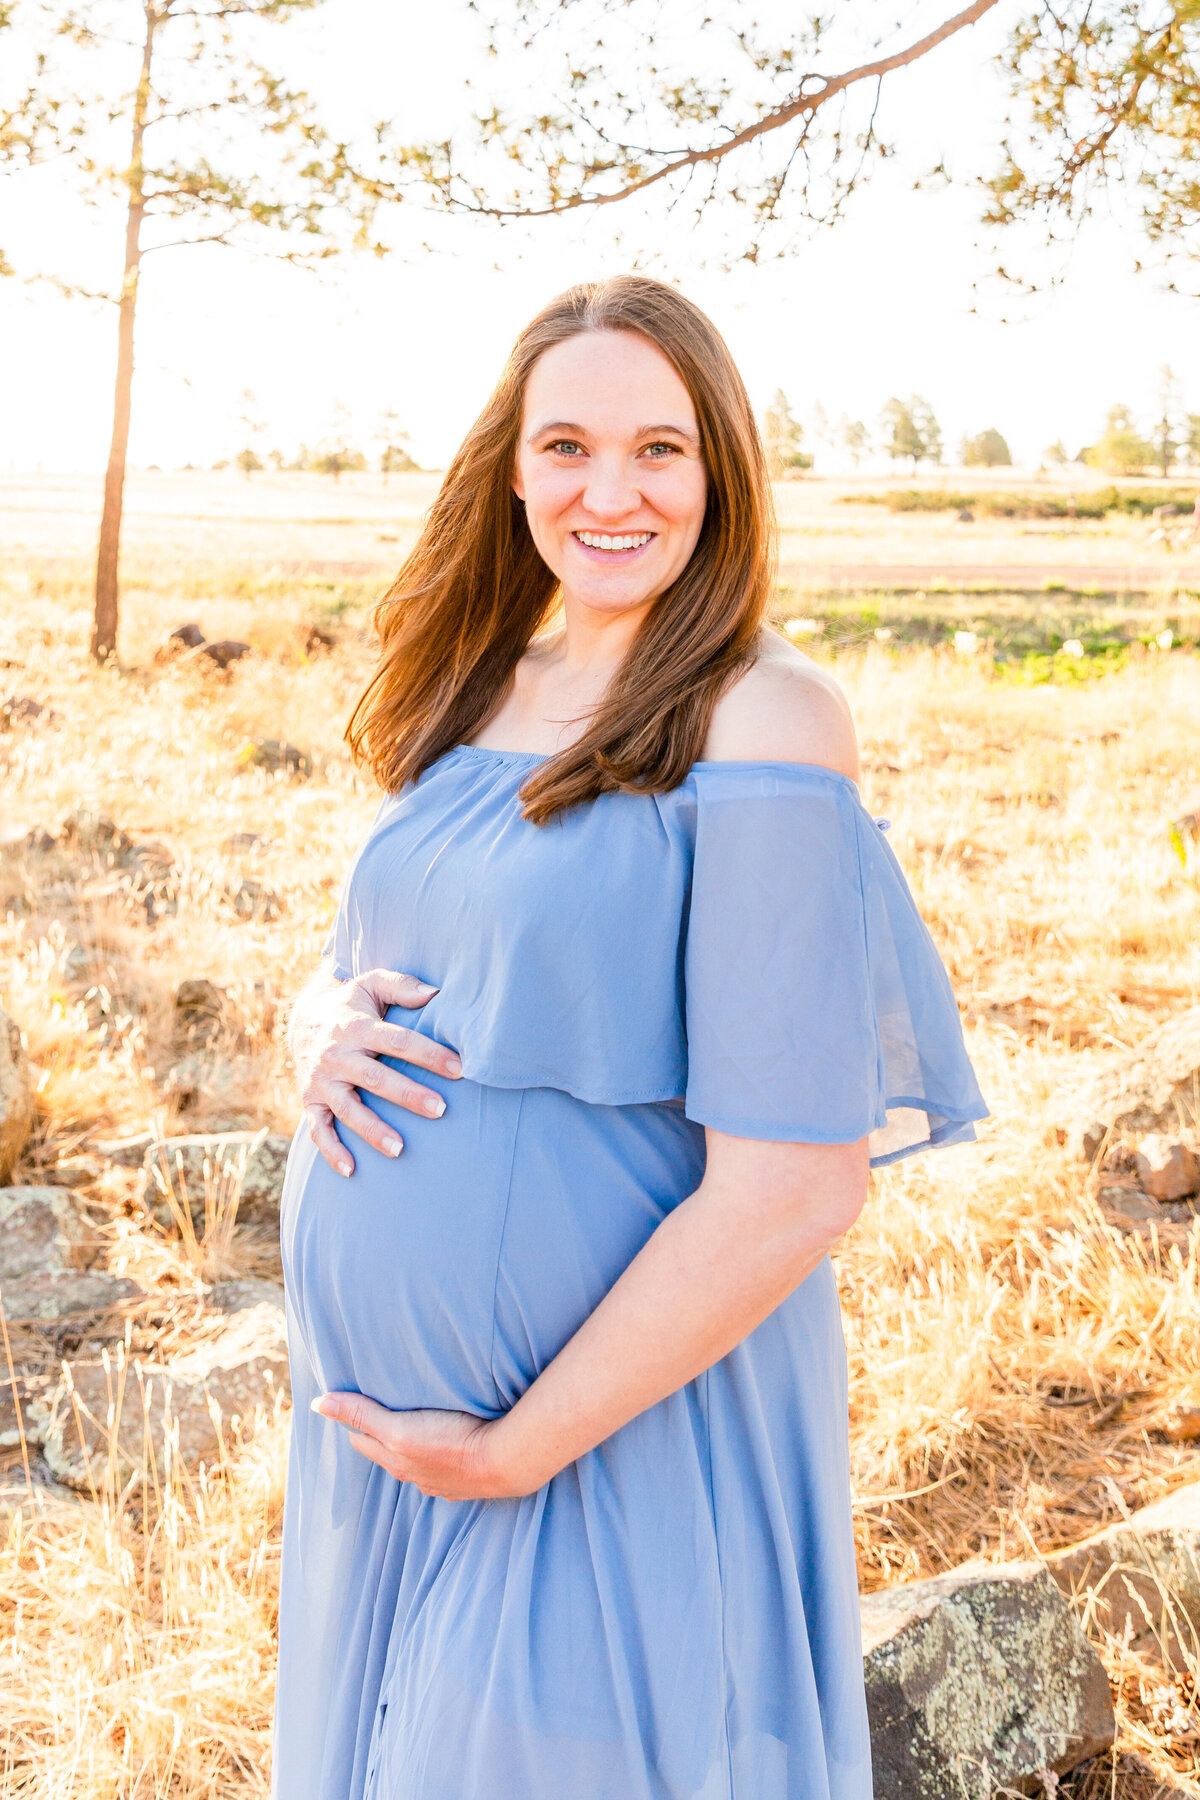 Smiling mama during a maternity photo session in Flagstaff, Arizona